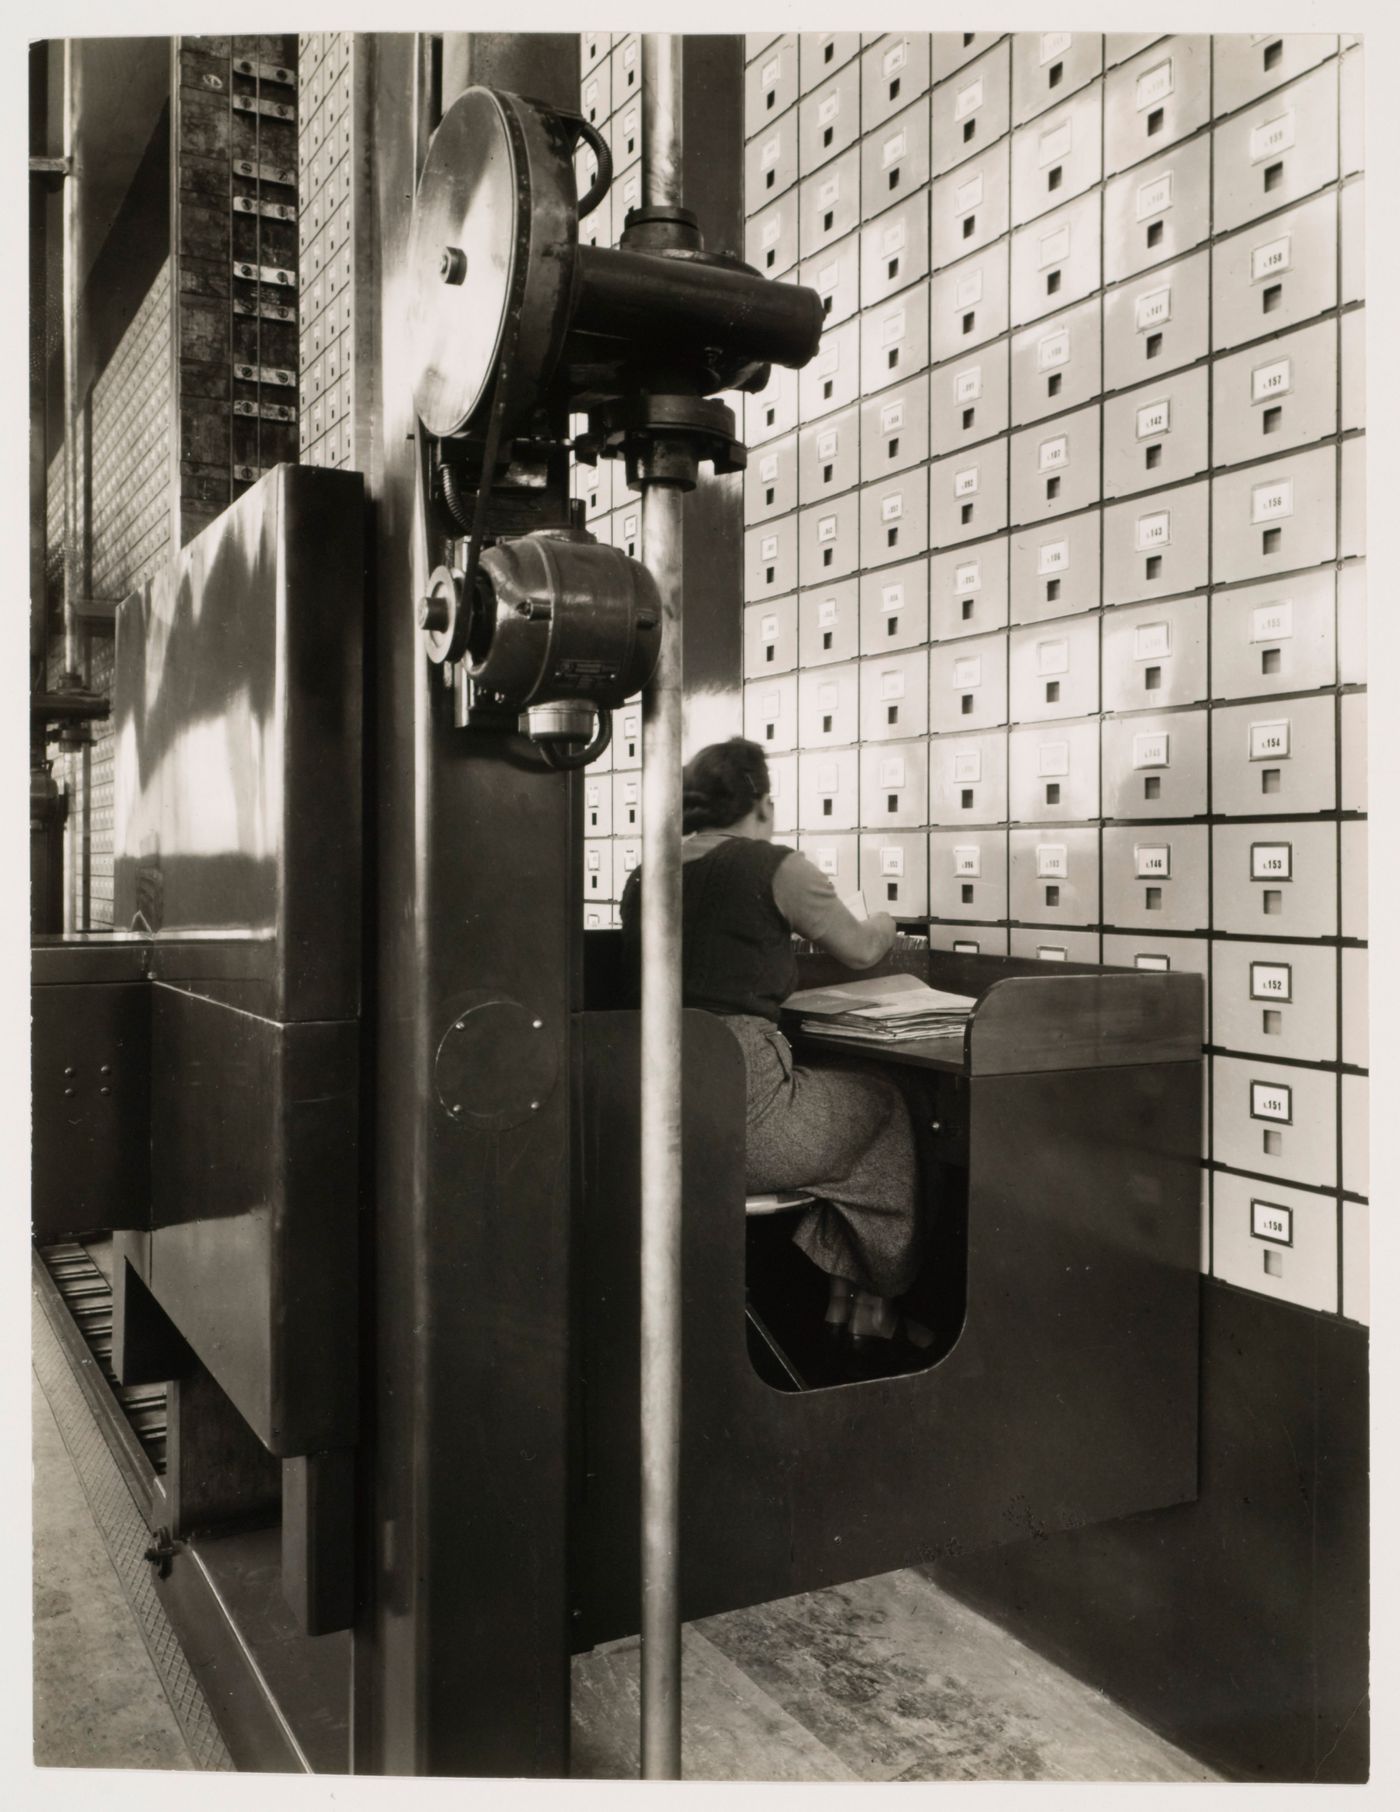 Interior view of the Central Social Insurance Institution showing a woman working at a mobile work station used to access the card catalog drawers, Prague, Czechoslovakia (now Czech Republic)